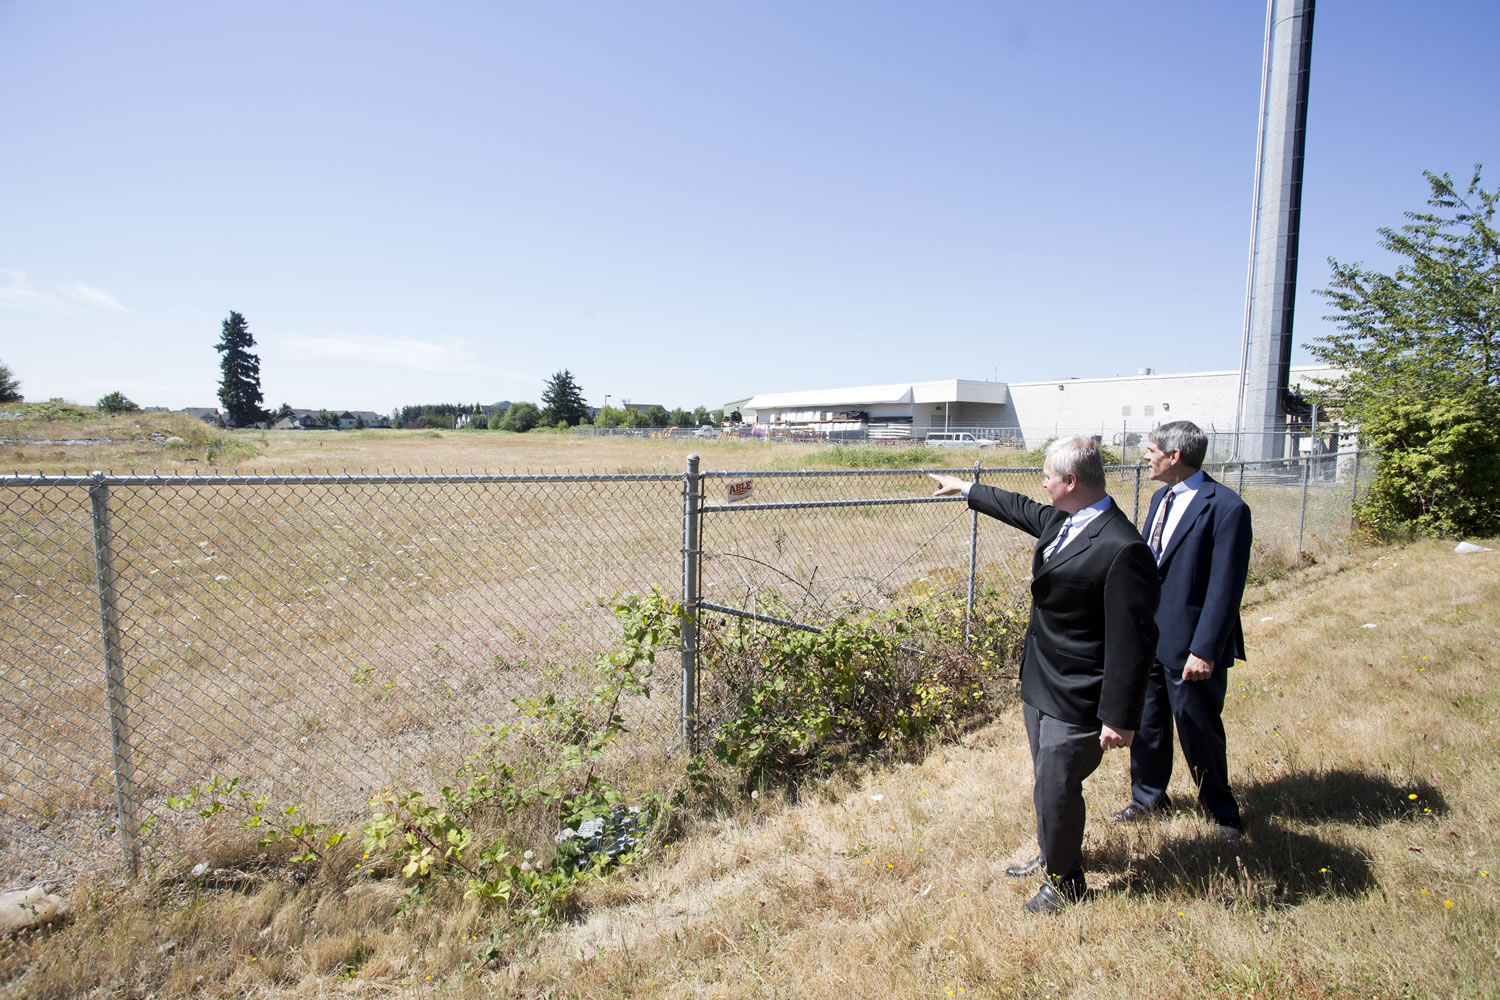 Troy Drawz, left, and Roy Johnson of the Vancouver Housing Authority look over the site where the VHA has proposed to build 152 units of low-income apartments, just east of 164th Avenue on Southeast First Street.